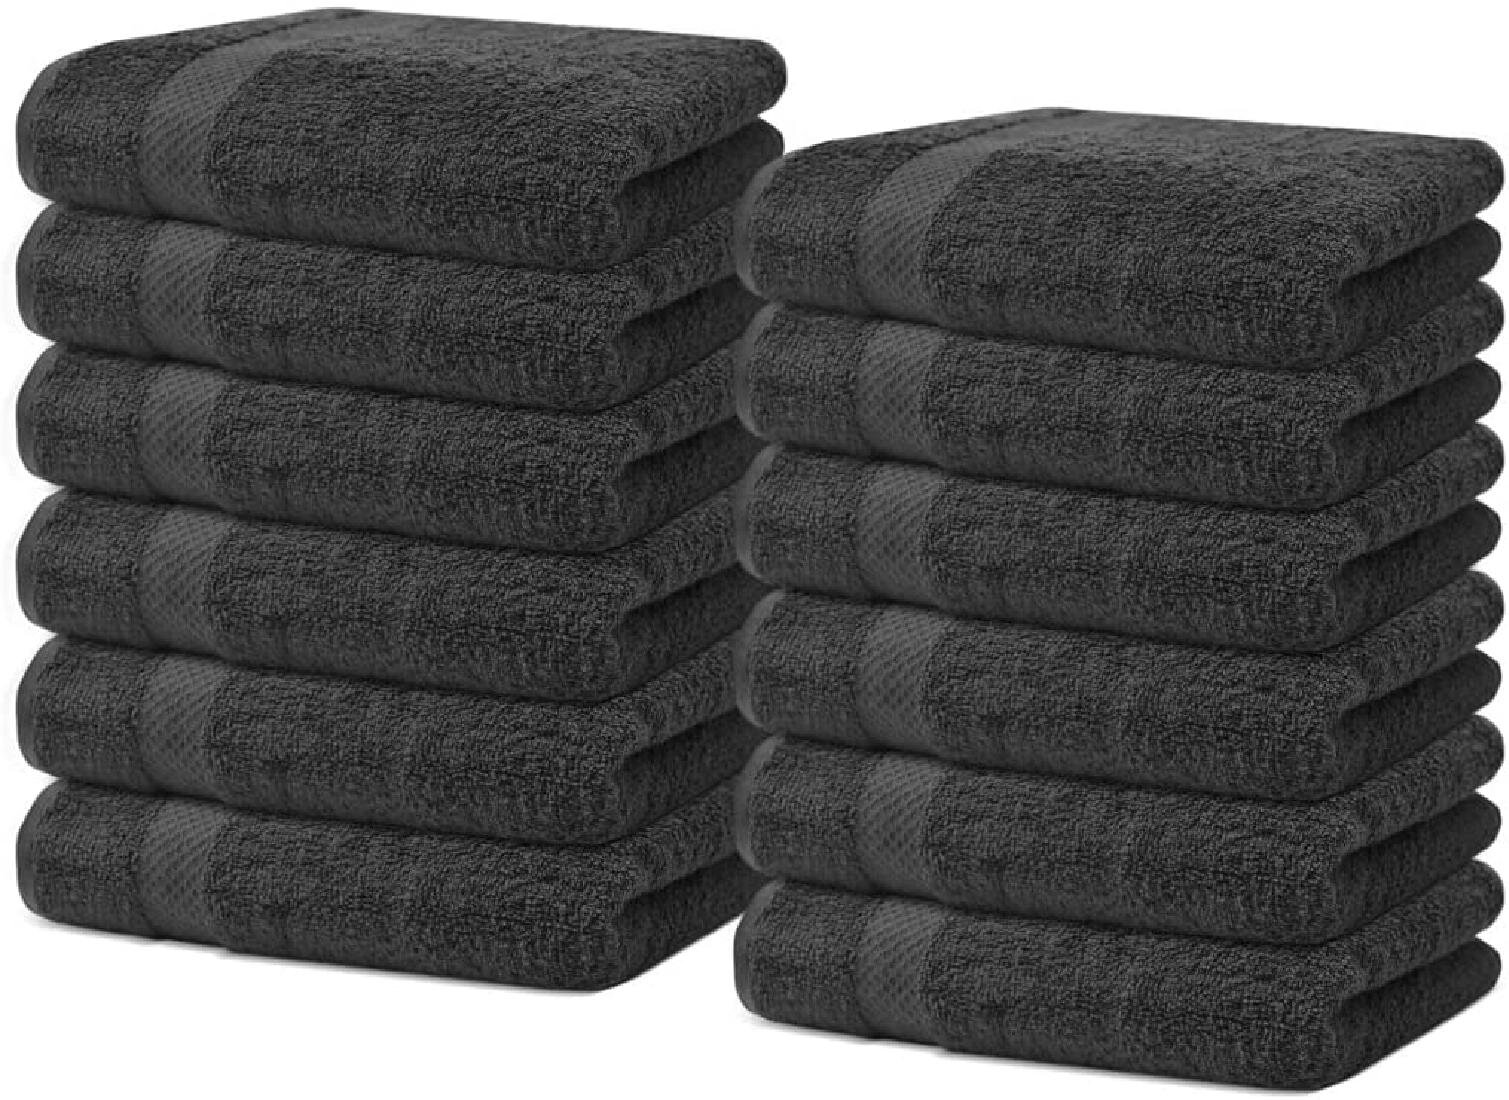 4 X LUXURY STRIPED 100% COMBED COTTON SOFT ABSORBANT SILVER BLACK HAND TOWELS 